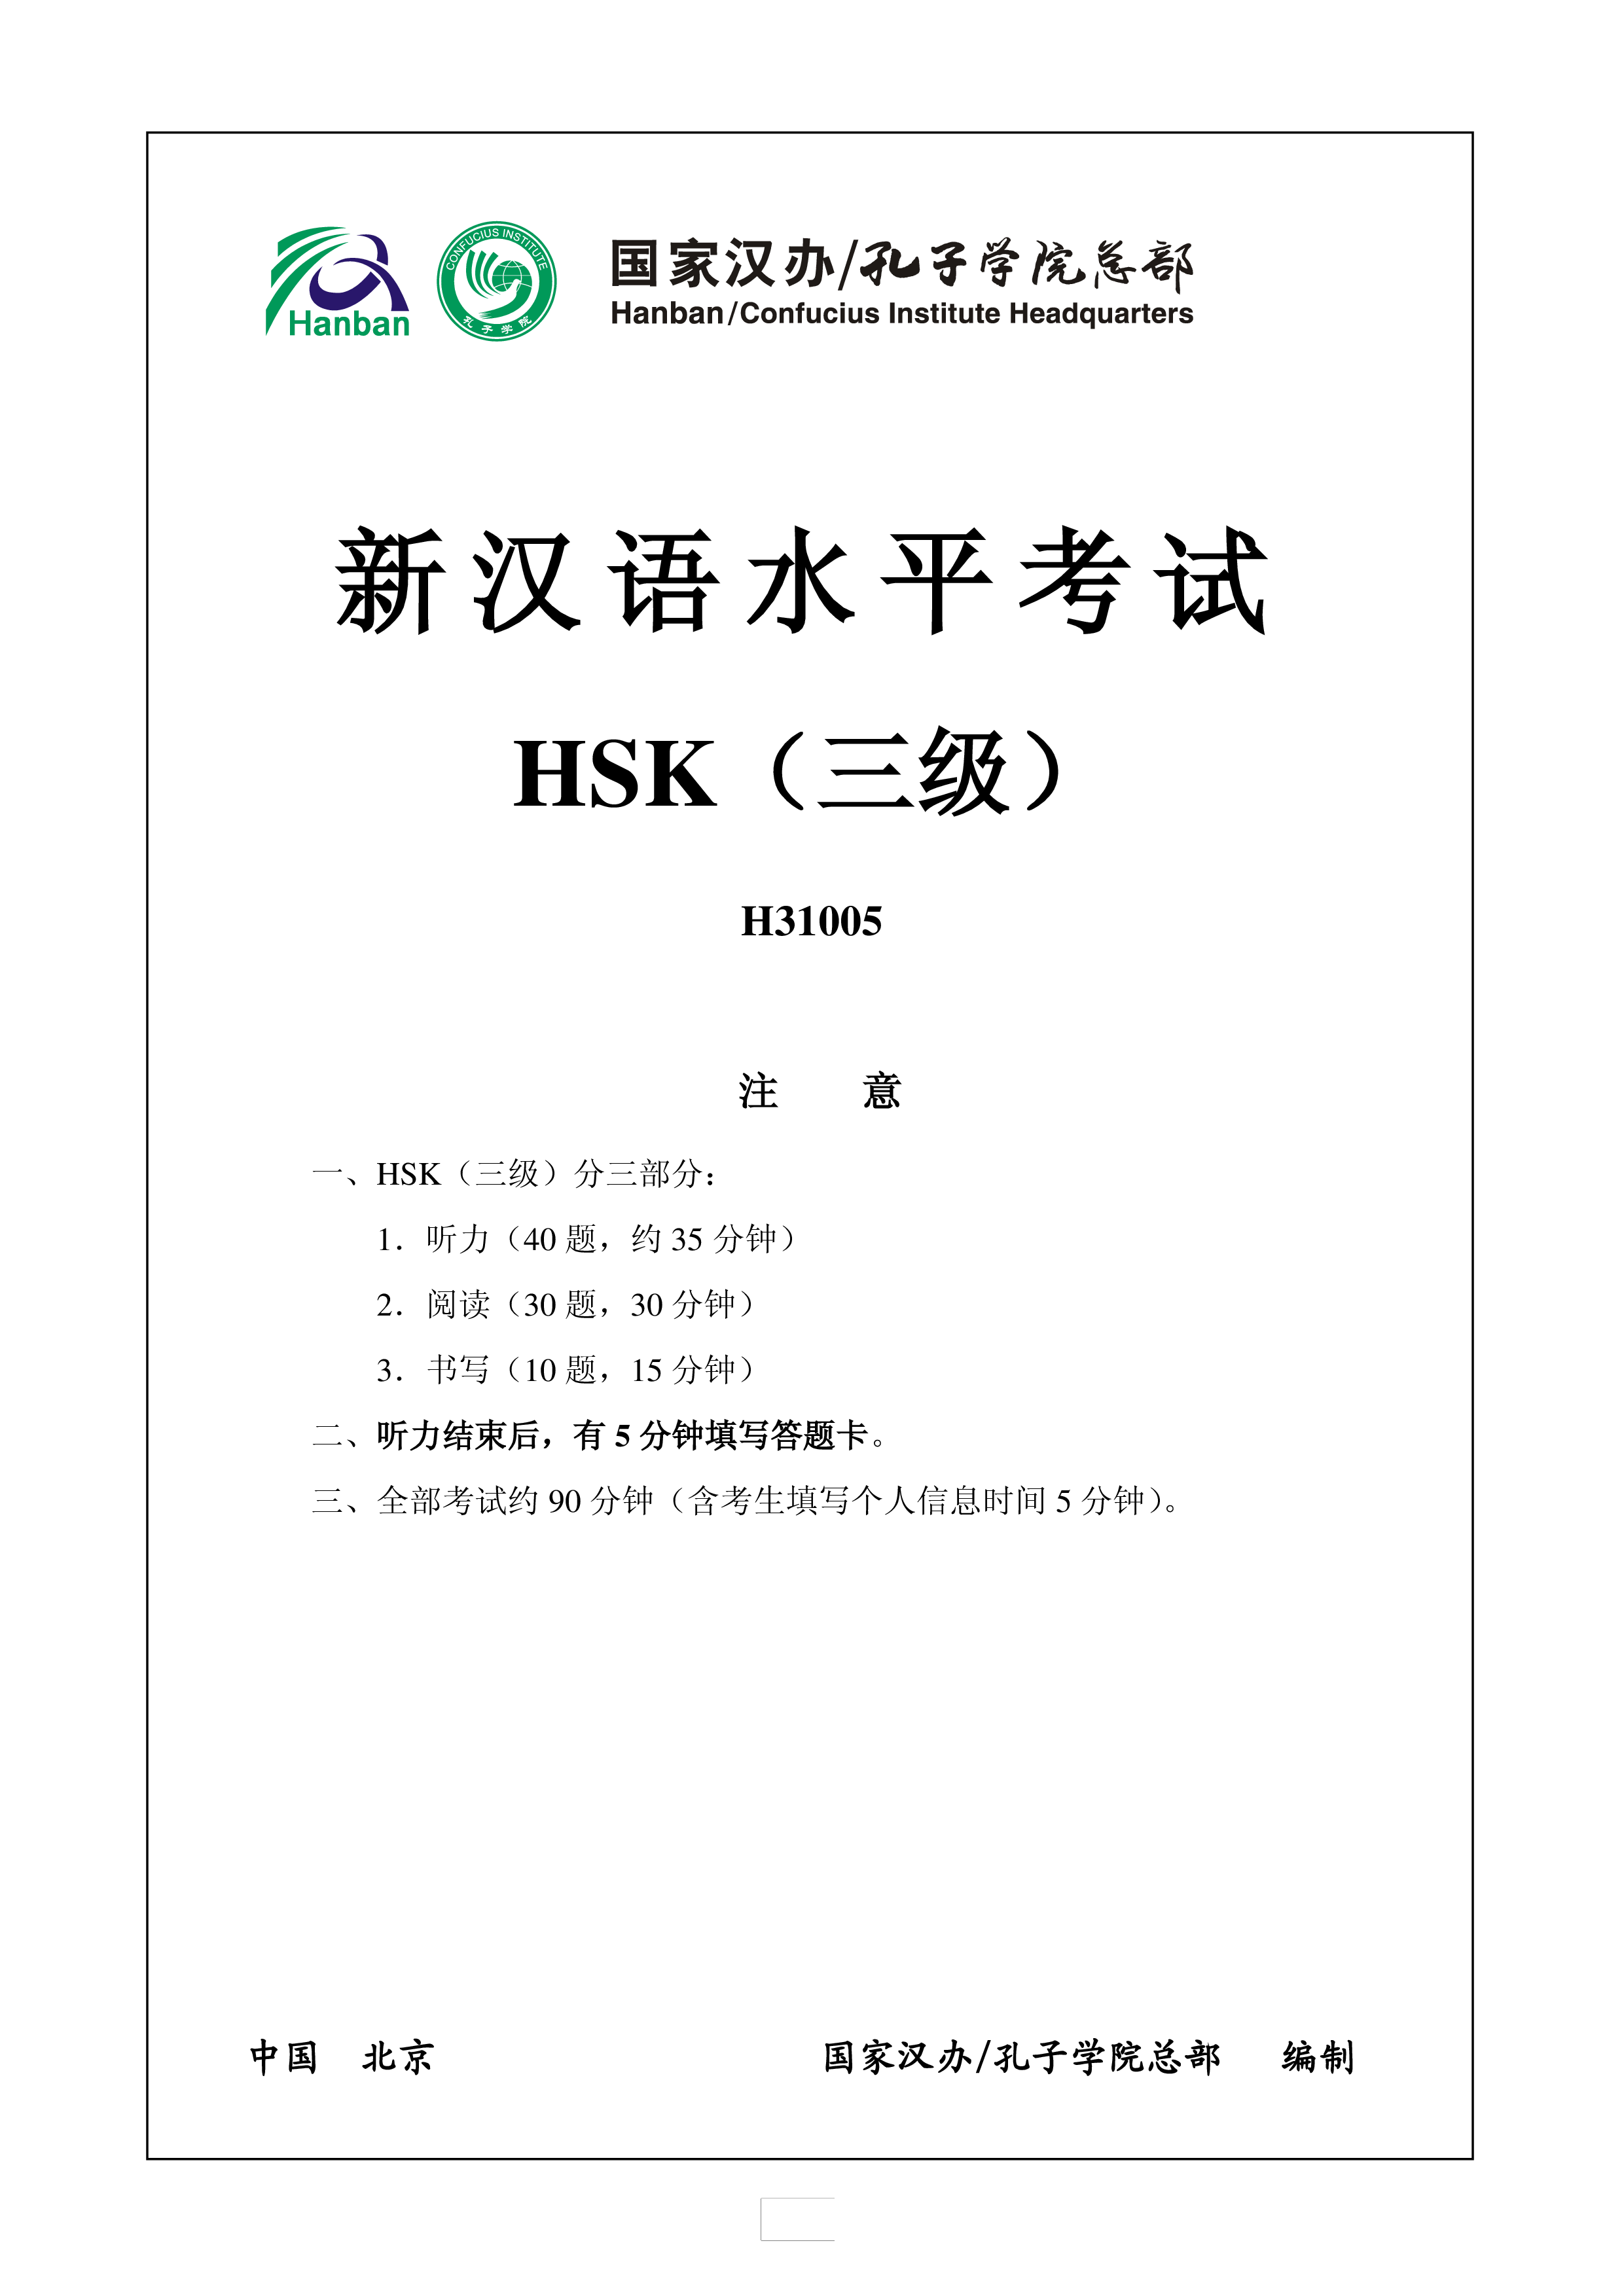 HSK3 Chinese Exam including Answers # HSK3 H31005 main image